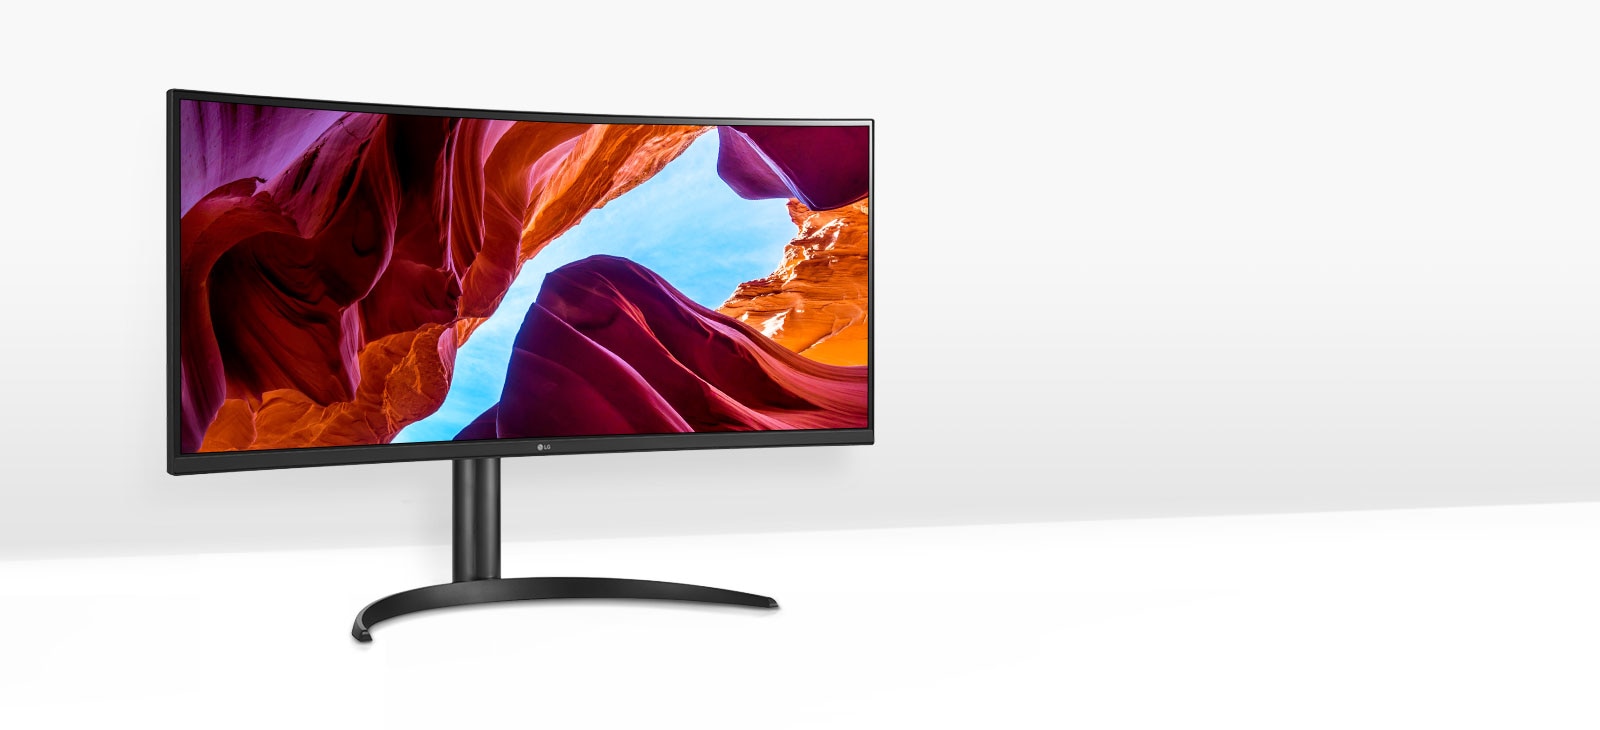 LG IPS display supports a wide color spectrum, 99% of sRGB color gamut, and offers outstanding color and brightness with the support of HDR10.